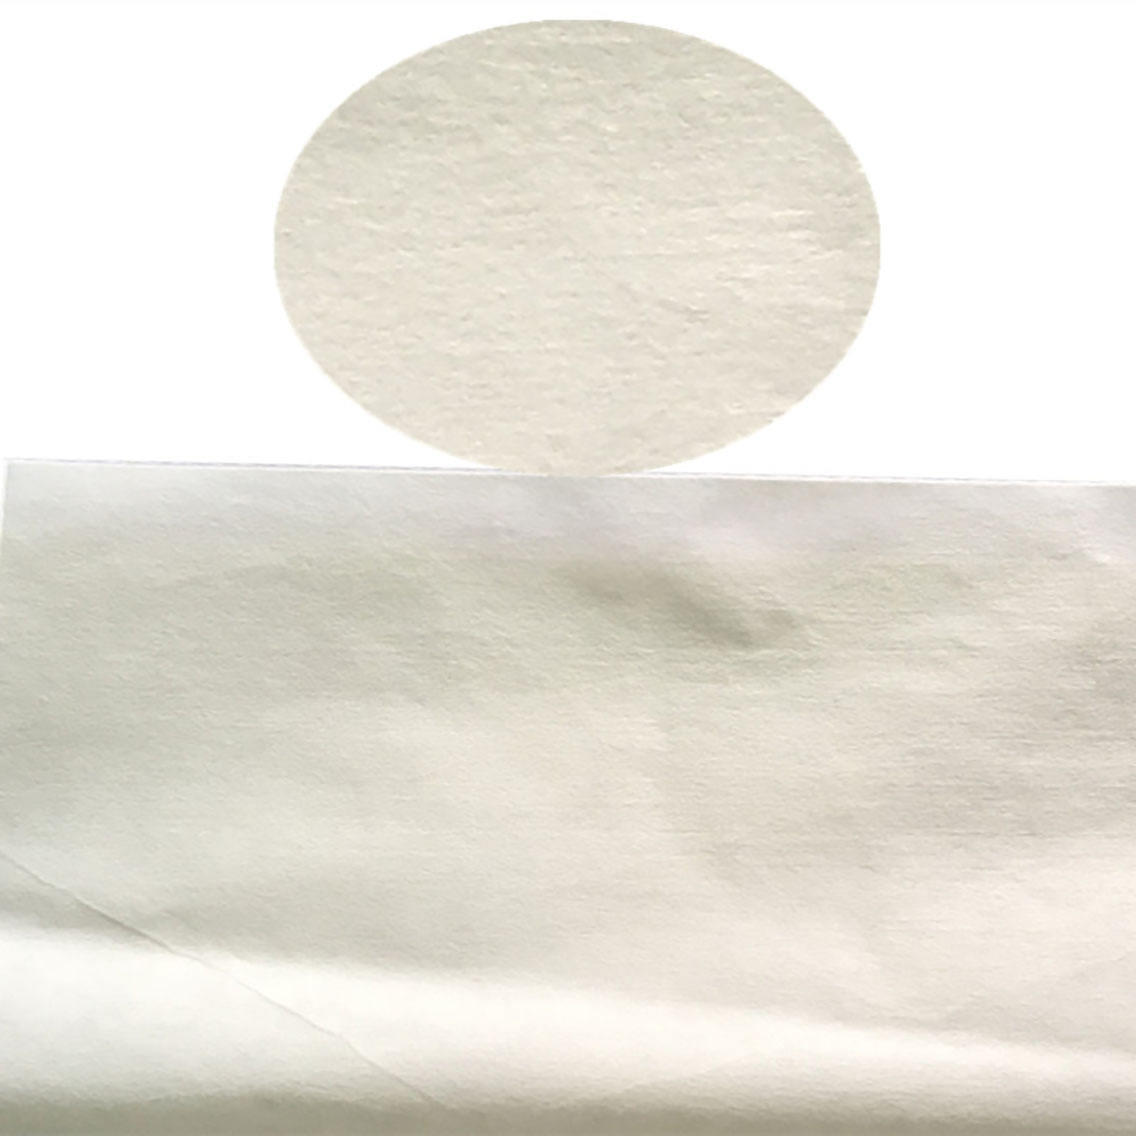 Cleanmo smooth clean room wipes manufacturers wholesale for medical device products-2